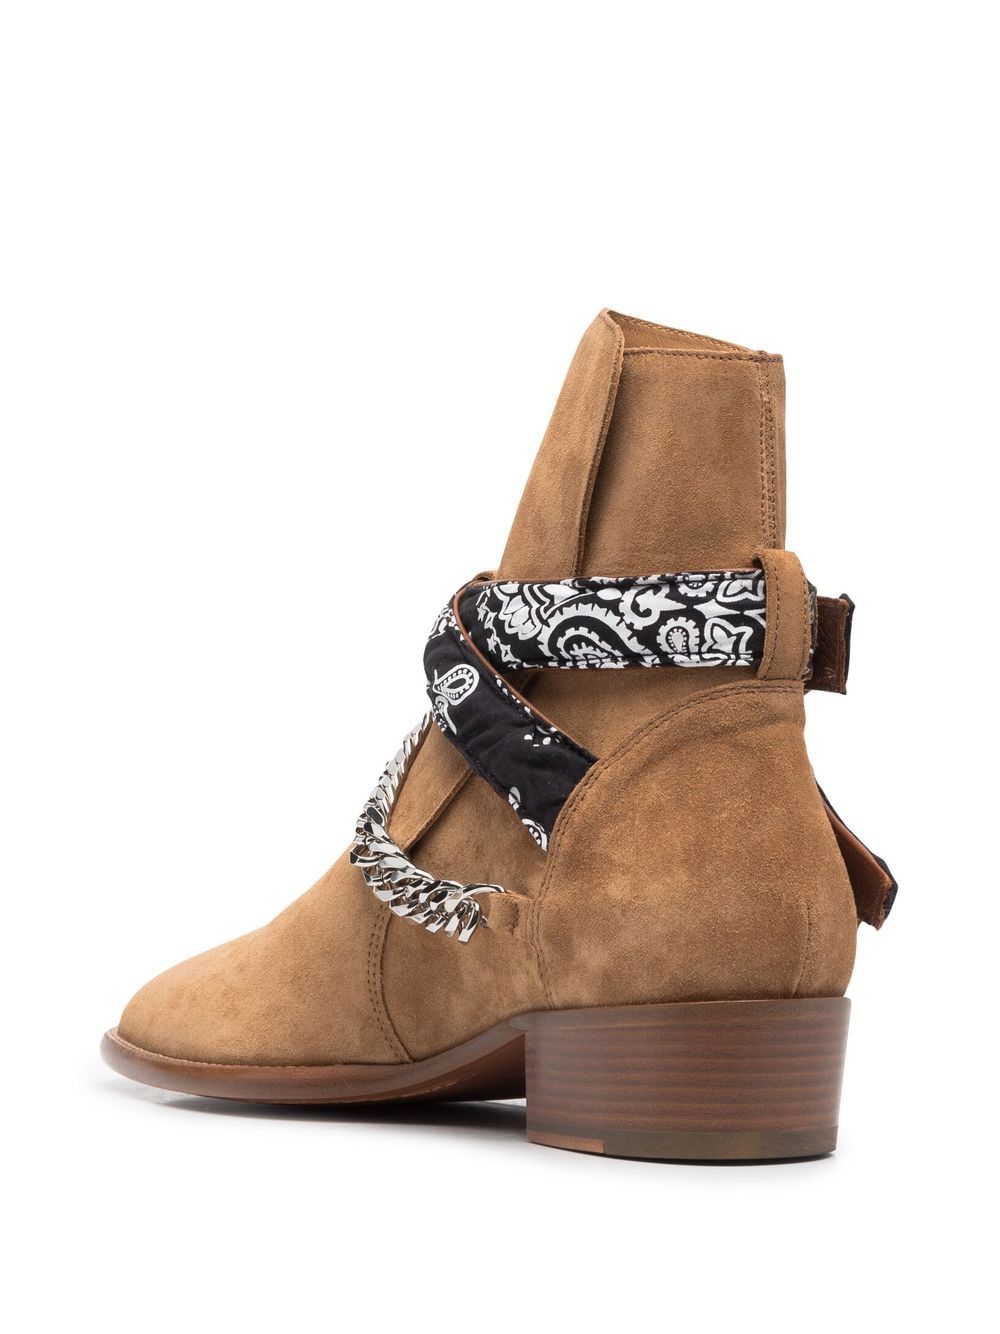 bandana-trimmed ankle boots